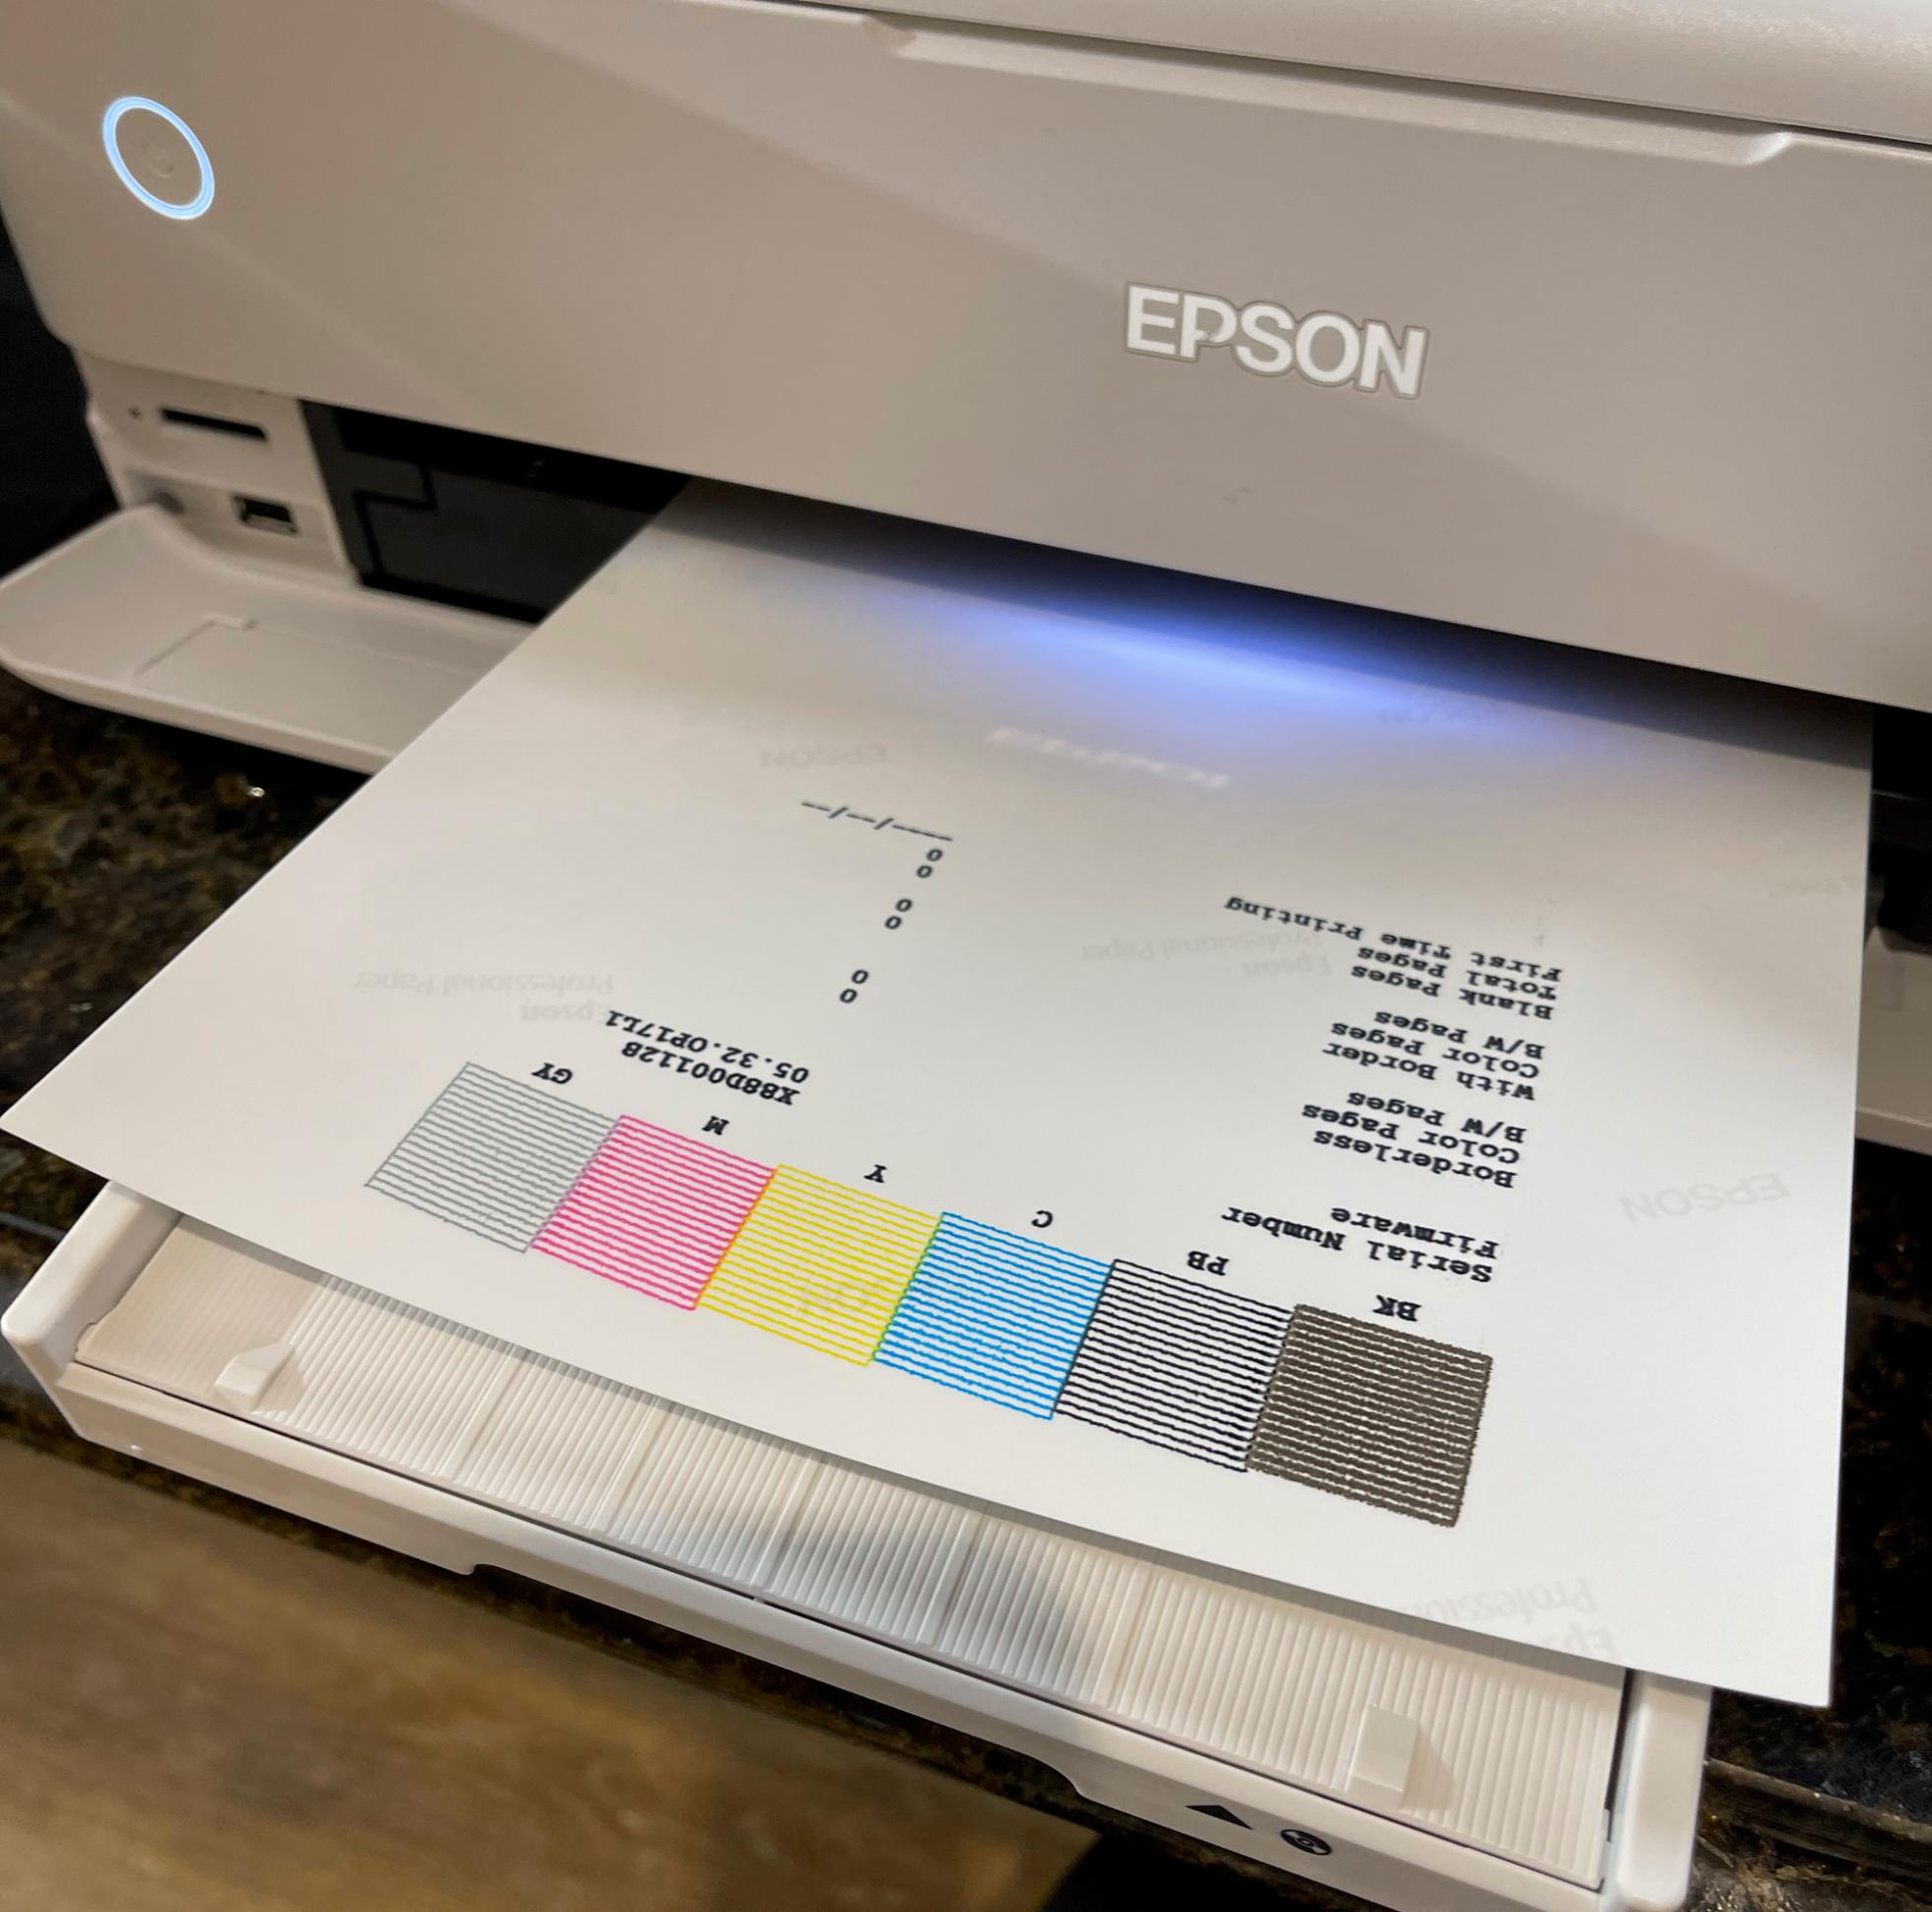 Epson Et 8550 Review Hands On Photopxl 5849